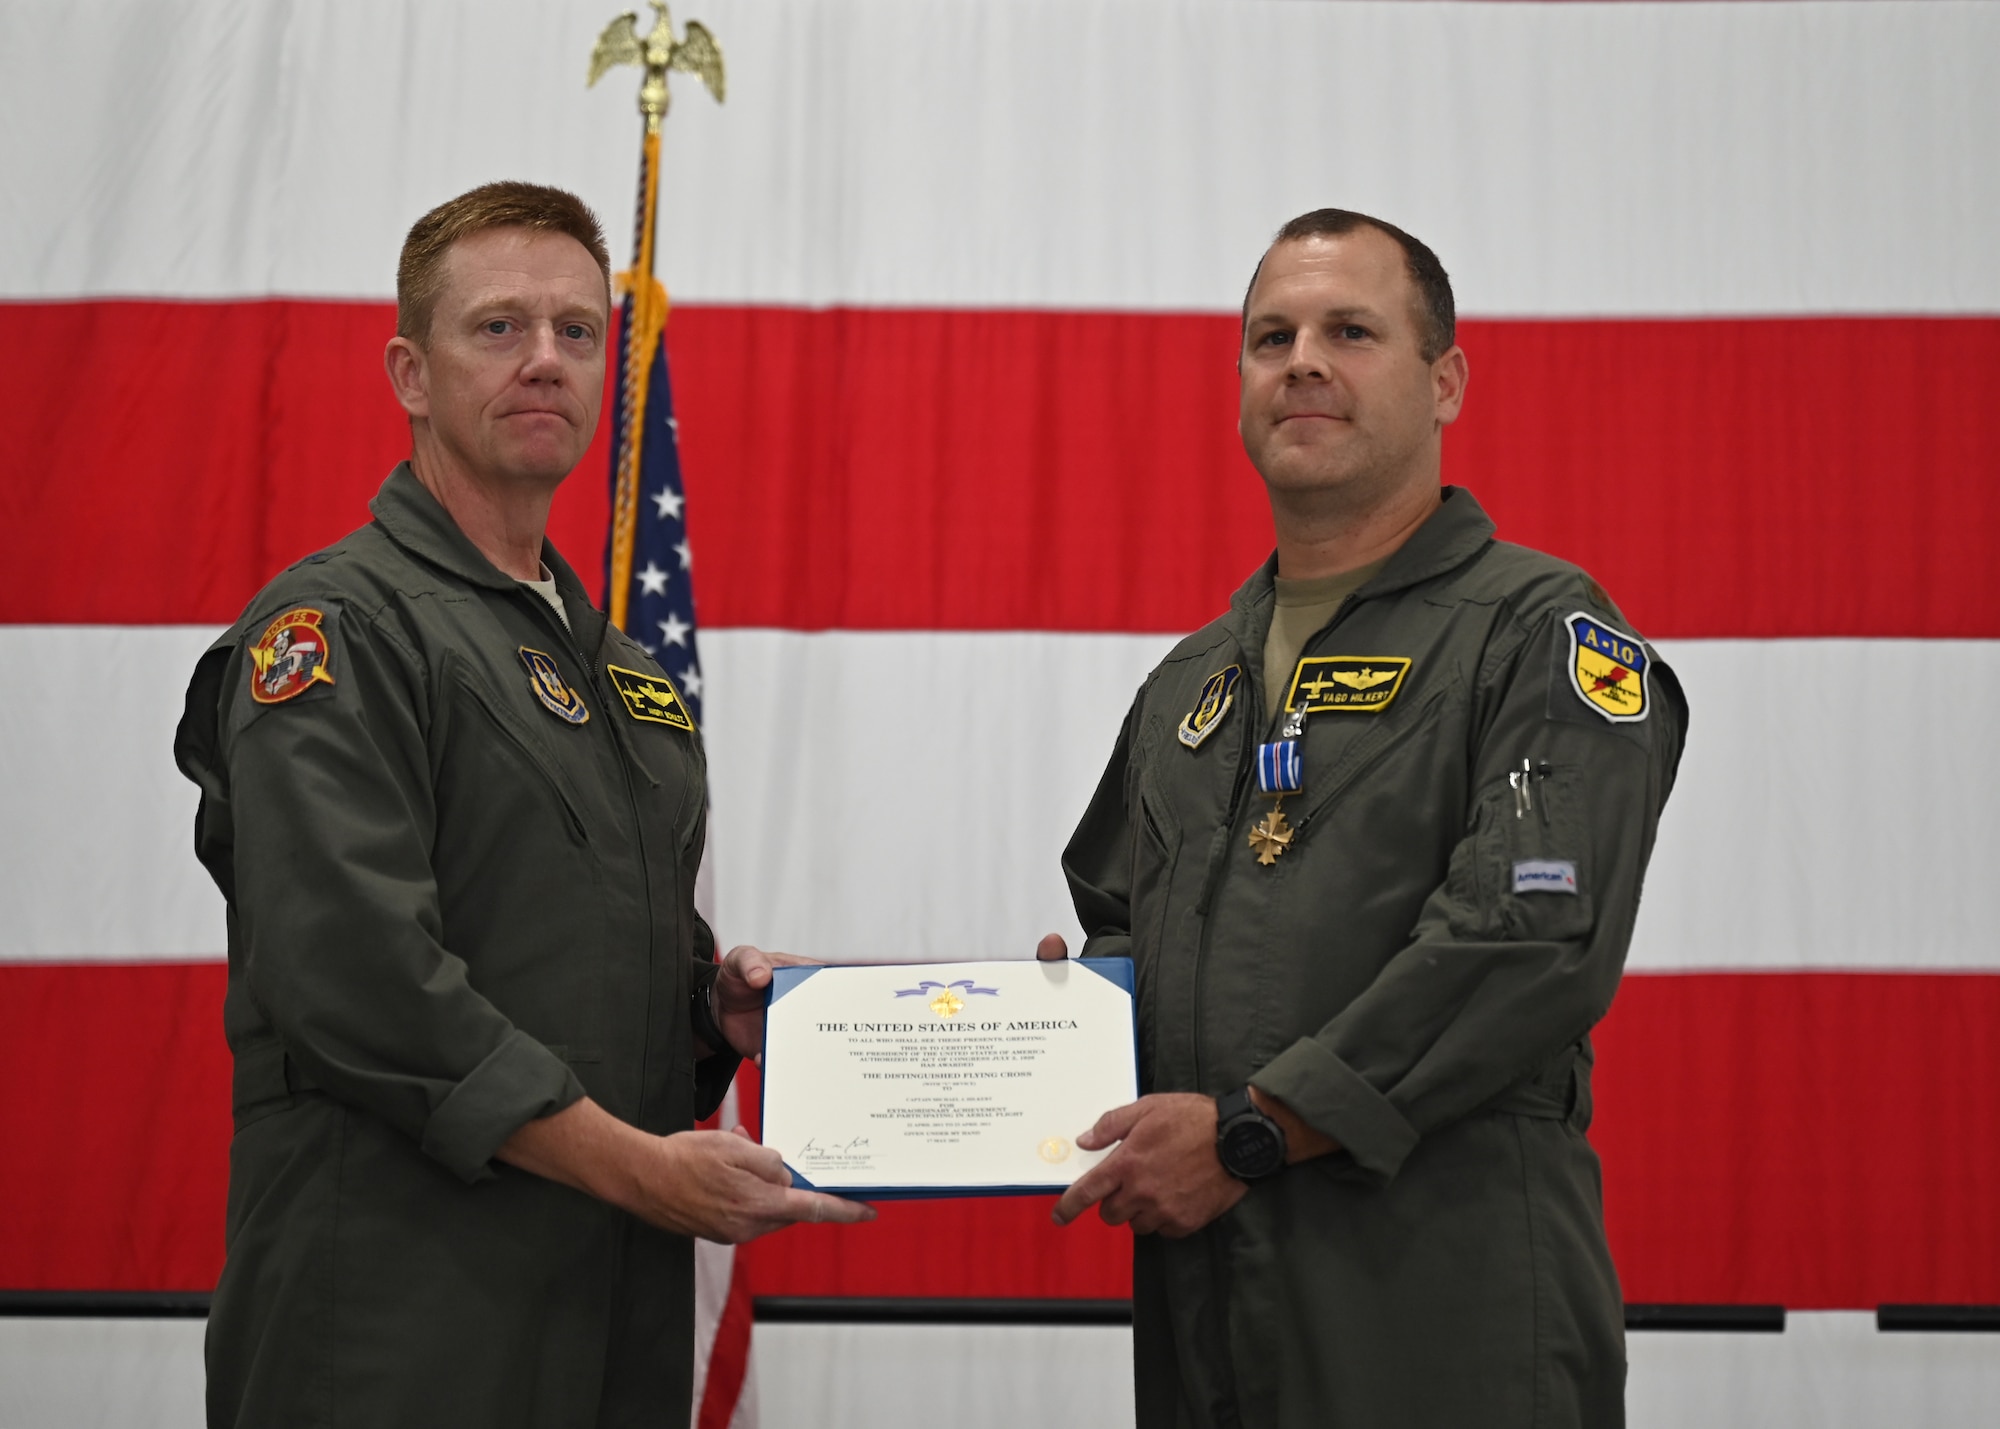 Two men in green coveralls hold a medal citation in front of a large American flag. The citation reads "The United States of America. To all who shall see these presents, greetings. This is to certify that the president of the United States of America, authorized by act of Congress July 5, 1928, has awarded the Distinguished Flying Cross with "v" device to Captain Michael J. Hilkert for extraordinary achievement while participating in aerial flight."